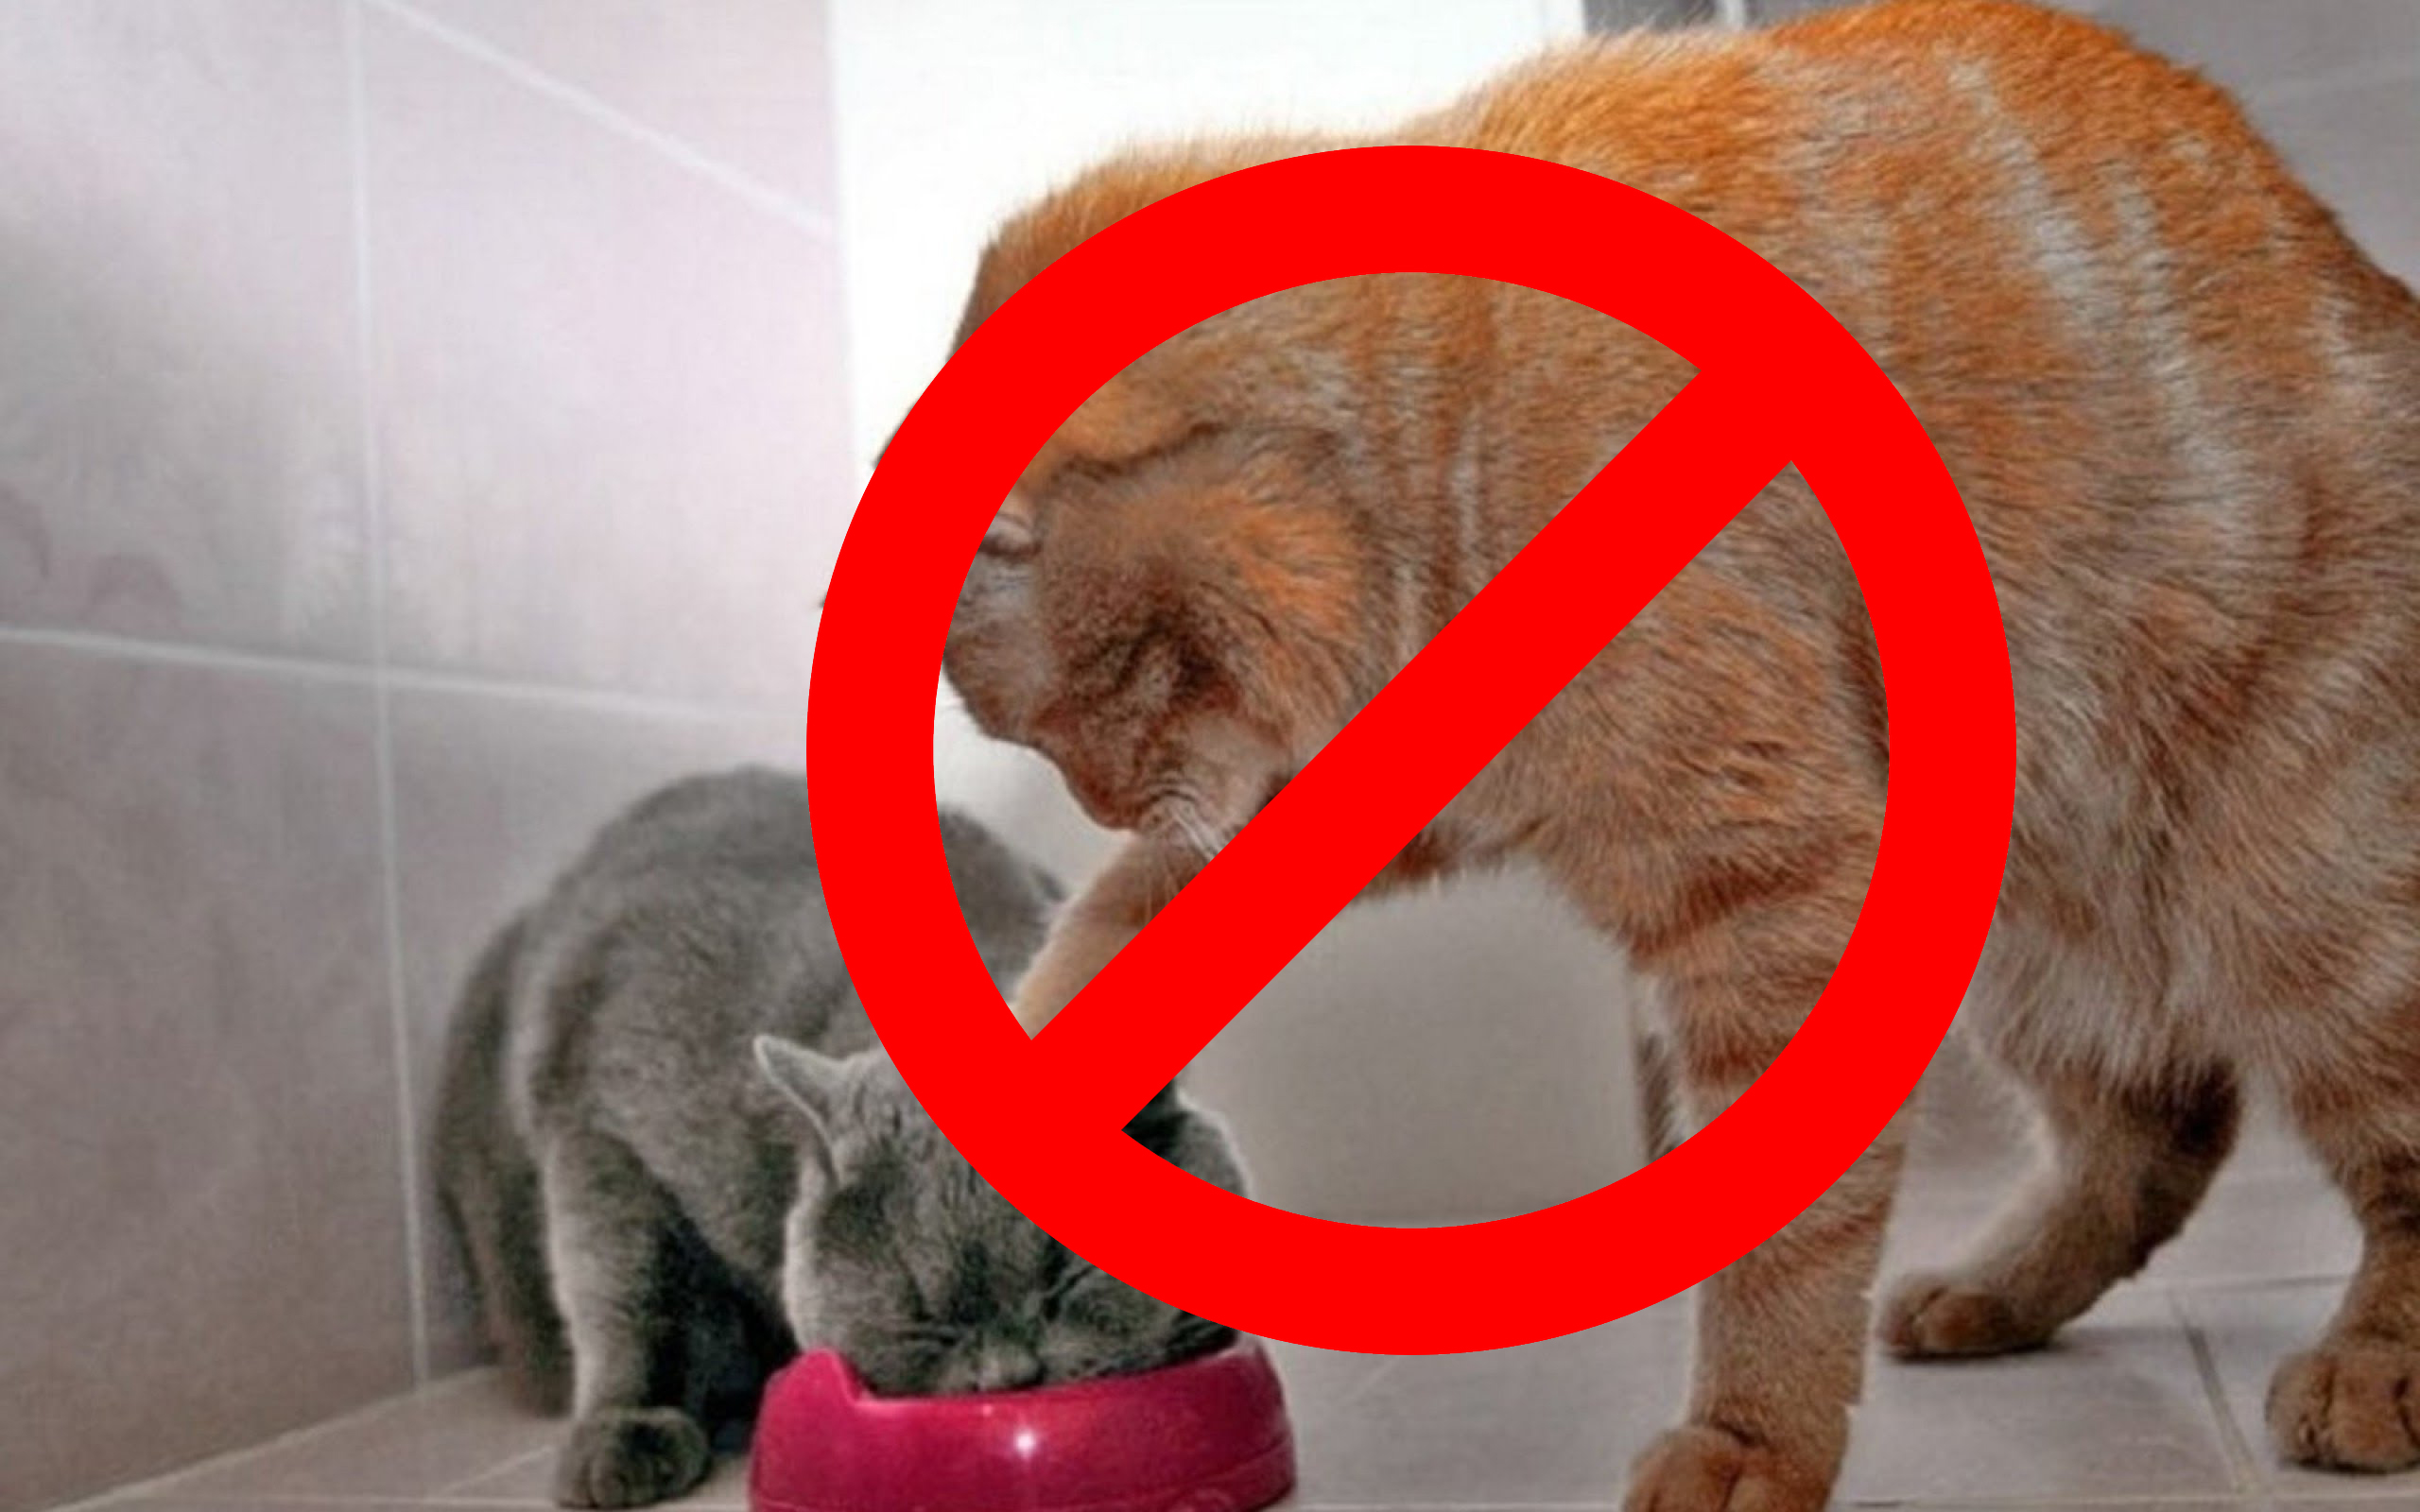 Cat photos are banned for Muslims in Saudi Arabia.